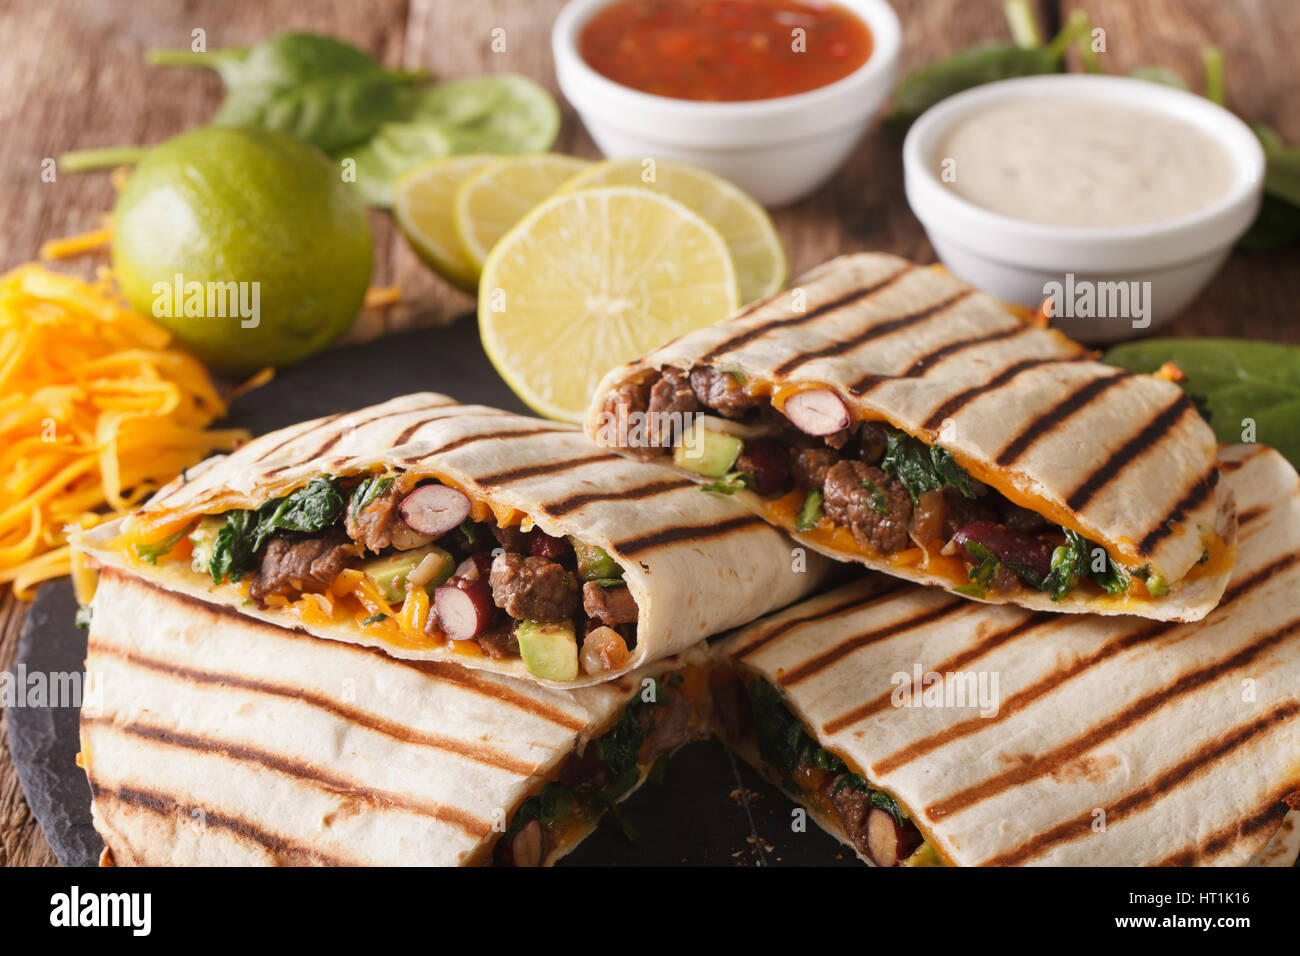 Grilled quesadilla with beef, spinach and cheddar cheese close-up on the table. Horizontal Stock Photo